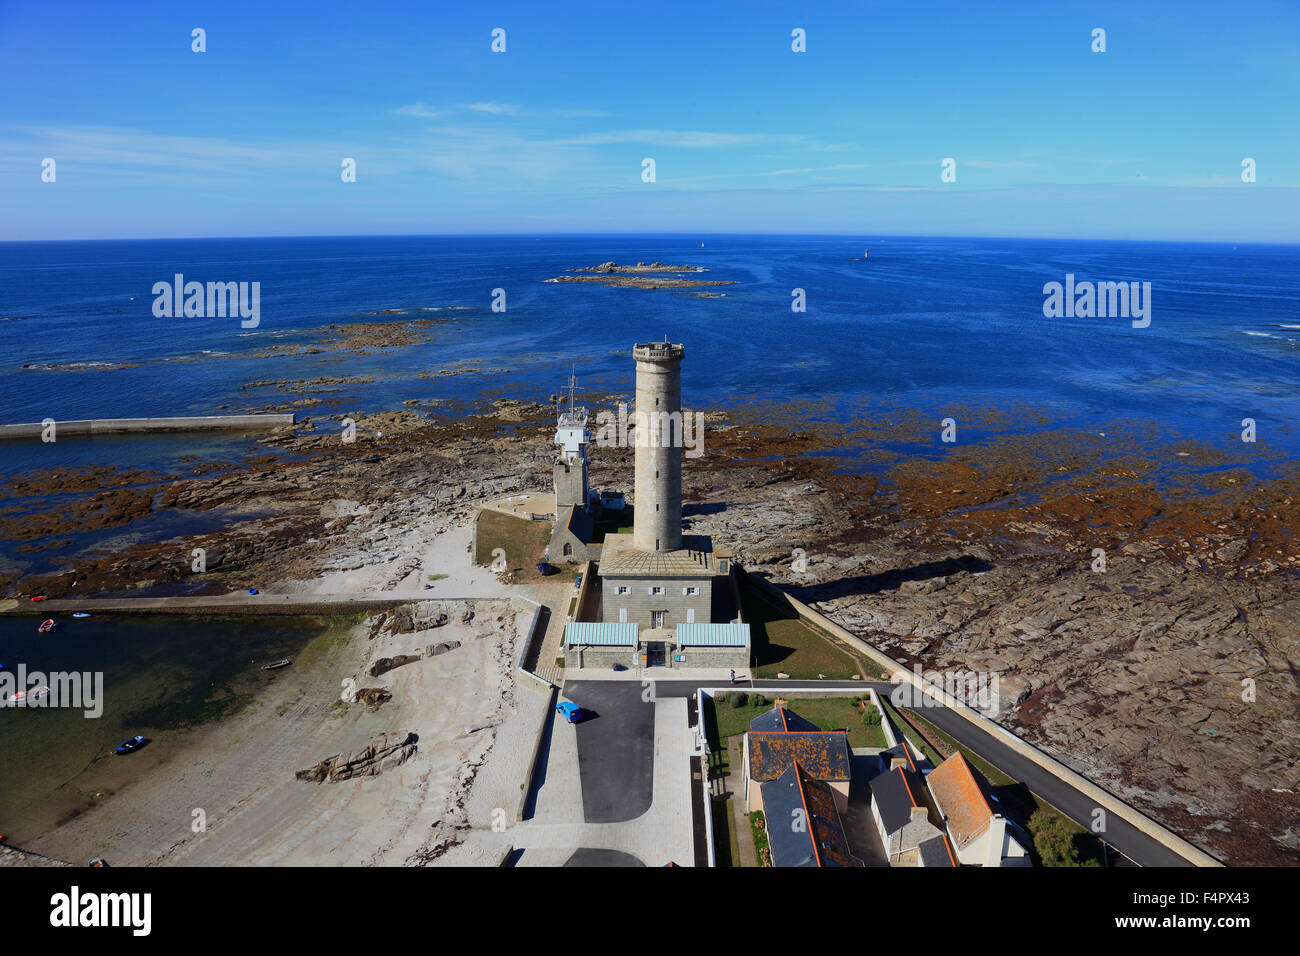 France, Brittany, view from the lighthouse Phare Echmuehl auf das Leuchtfeuer Vieille tour, die Kapelle Saint-Pierre Calvary and Stock Photo